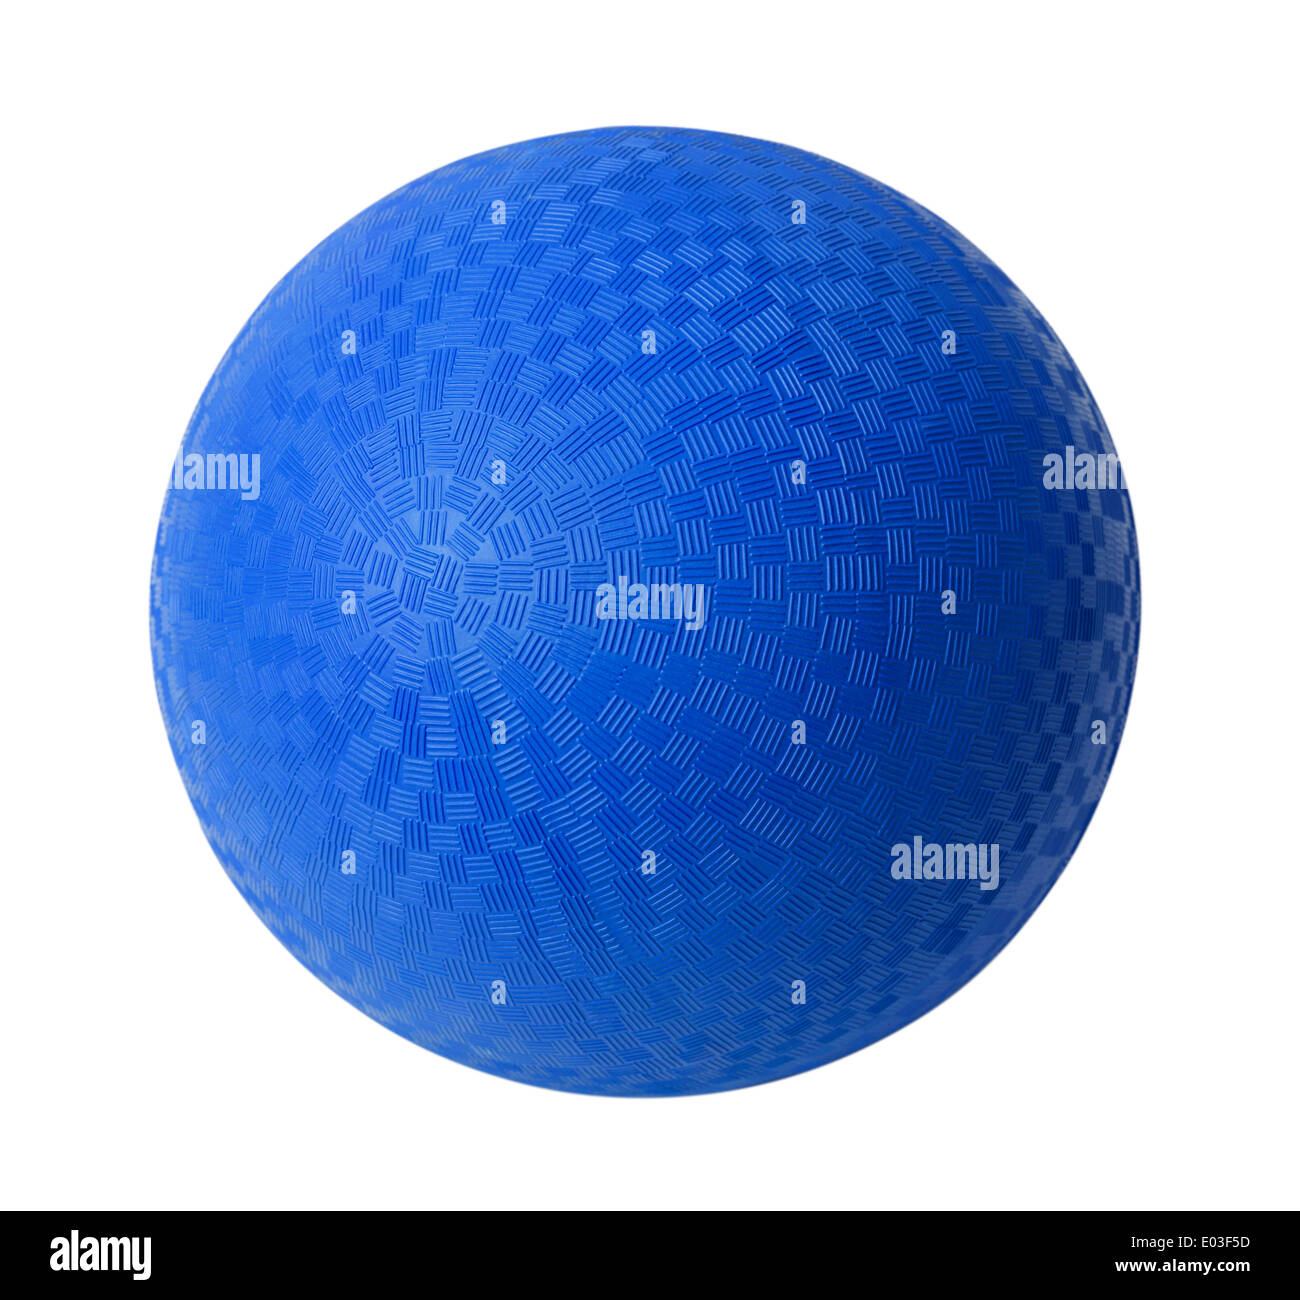 Blue Rubber Ball Isolated on White Background. Stock Photo